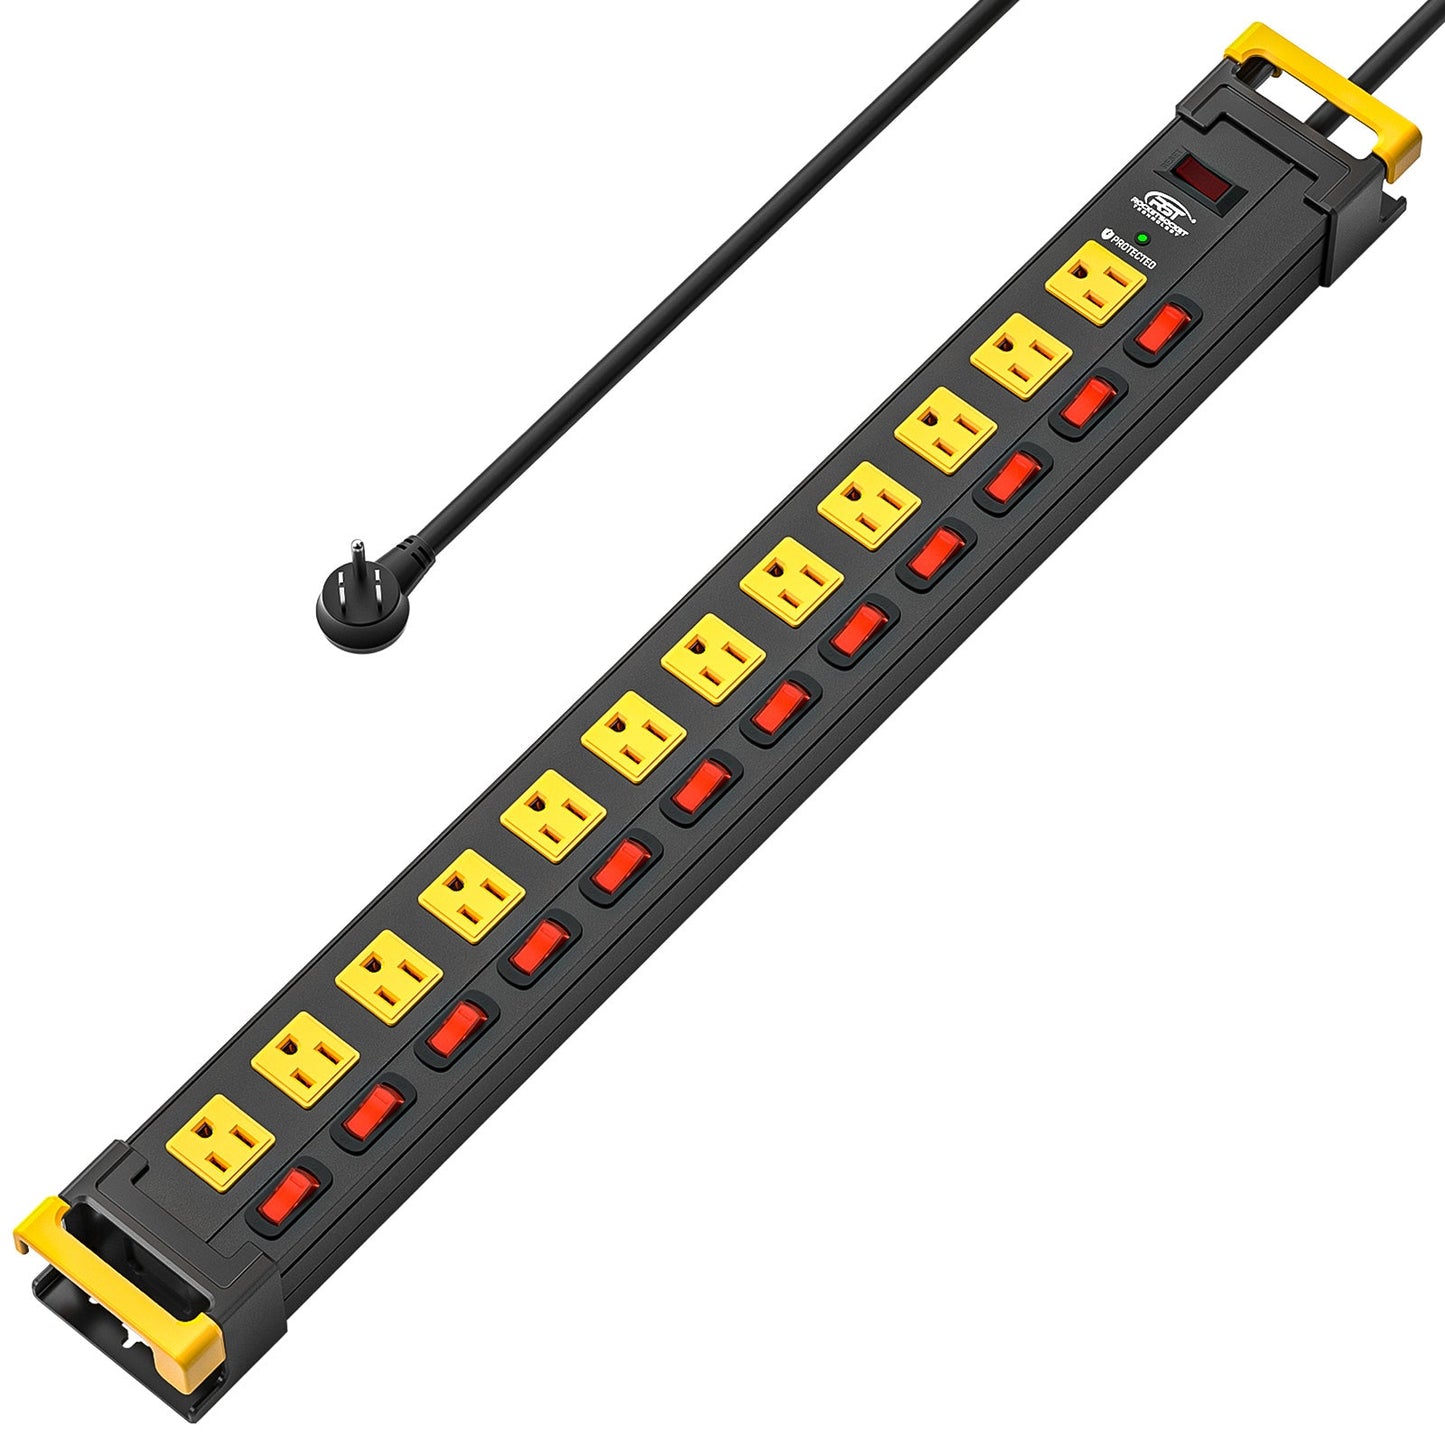 RocketSocket power strip Yellow CRST 12-Outlets 9 ft. Heavy Duty Surge Protector Power Strip 15A